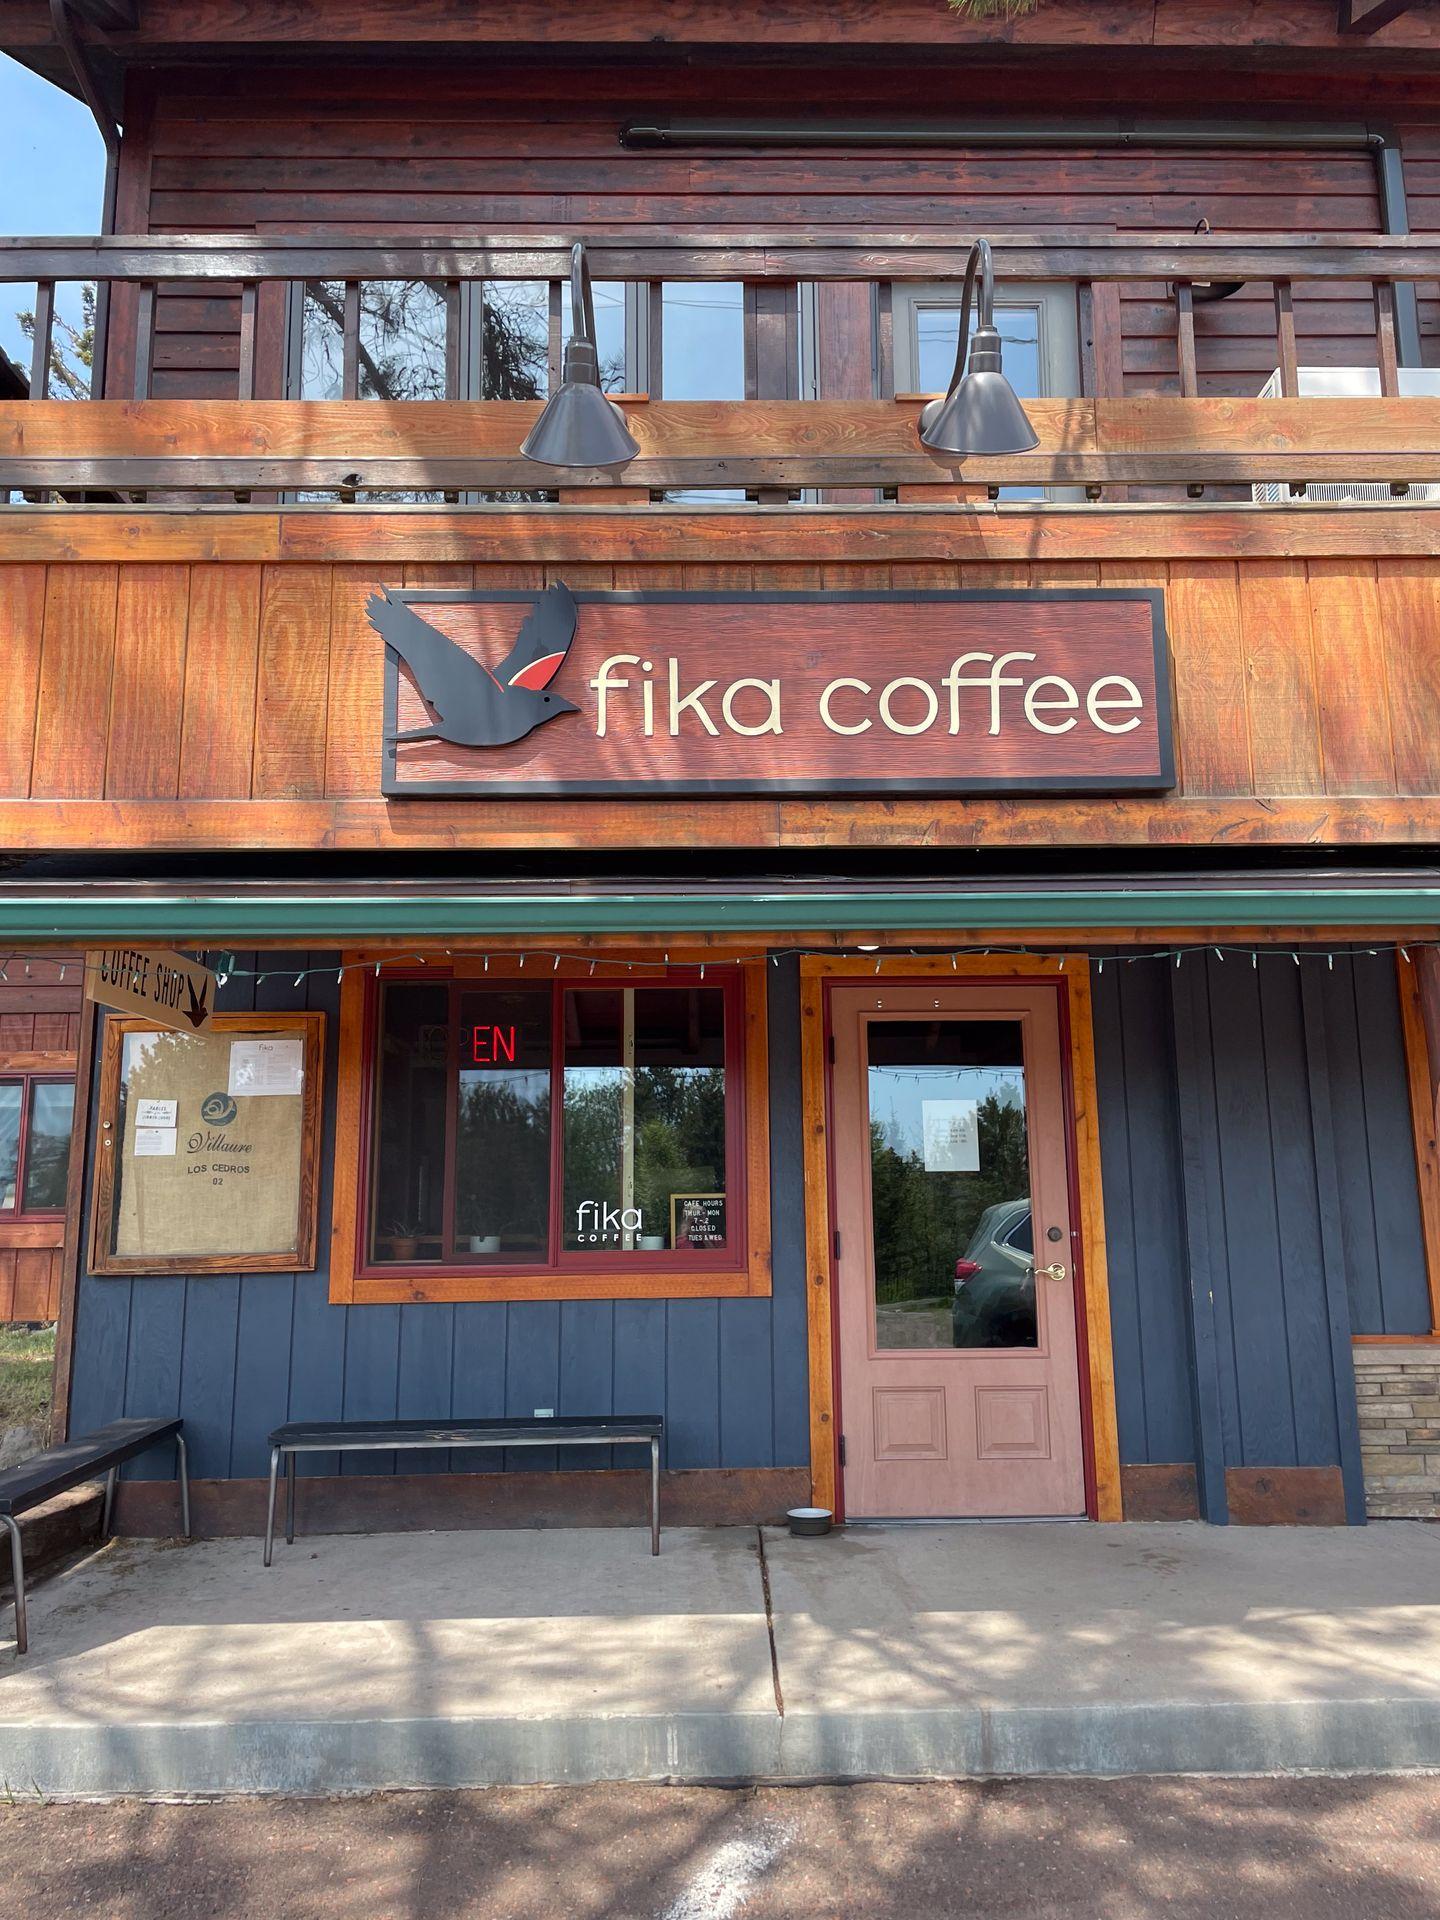 The exterior of Fika Coffee, which has blue paneling and wood surrounded the sign.